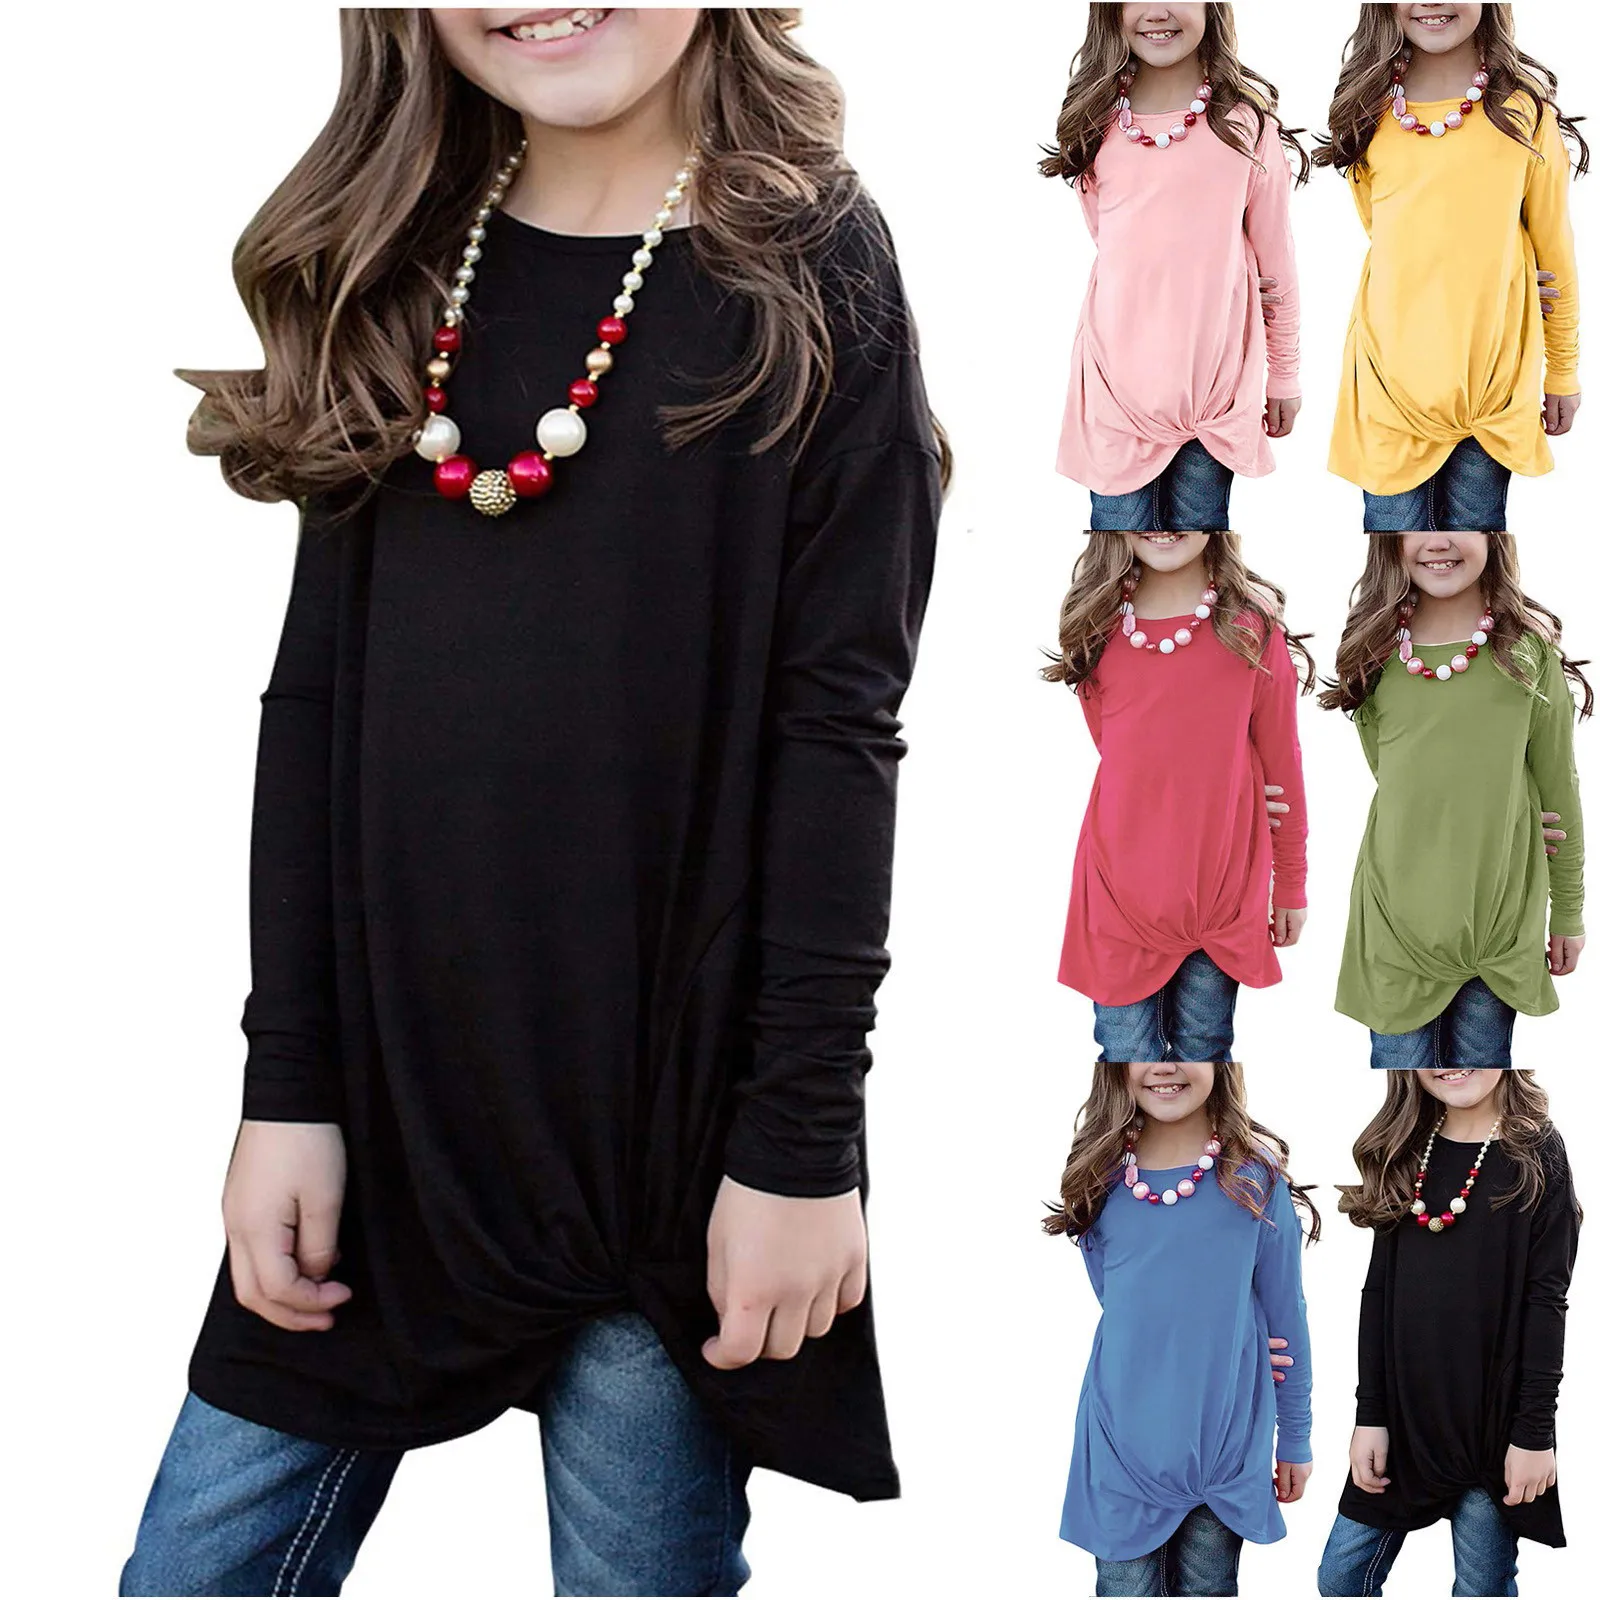 Ecokauer Girls Casual Tunic Tops Knot Front Long Sleeve Loose Soft Blouse T-Shirt Size 4-13 